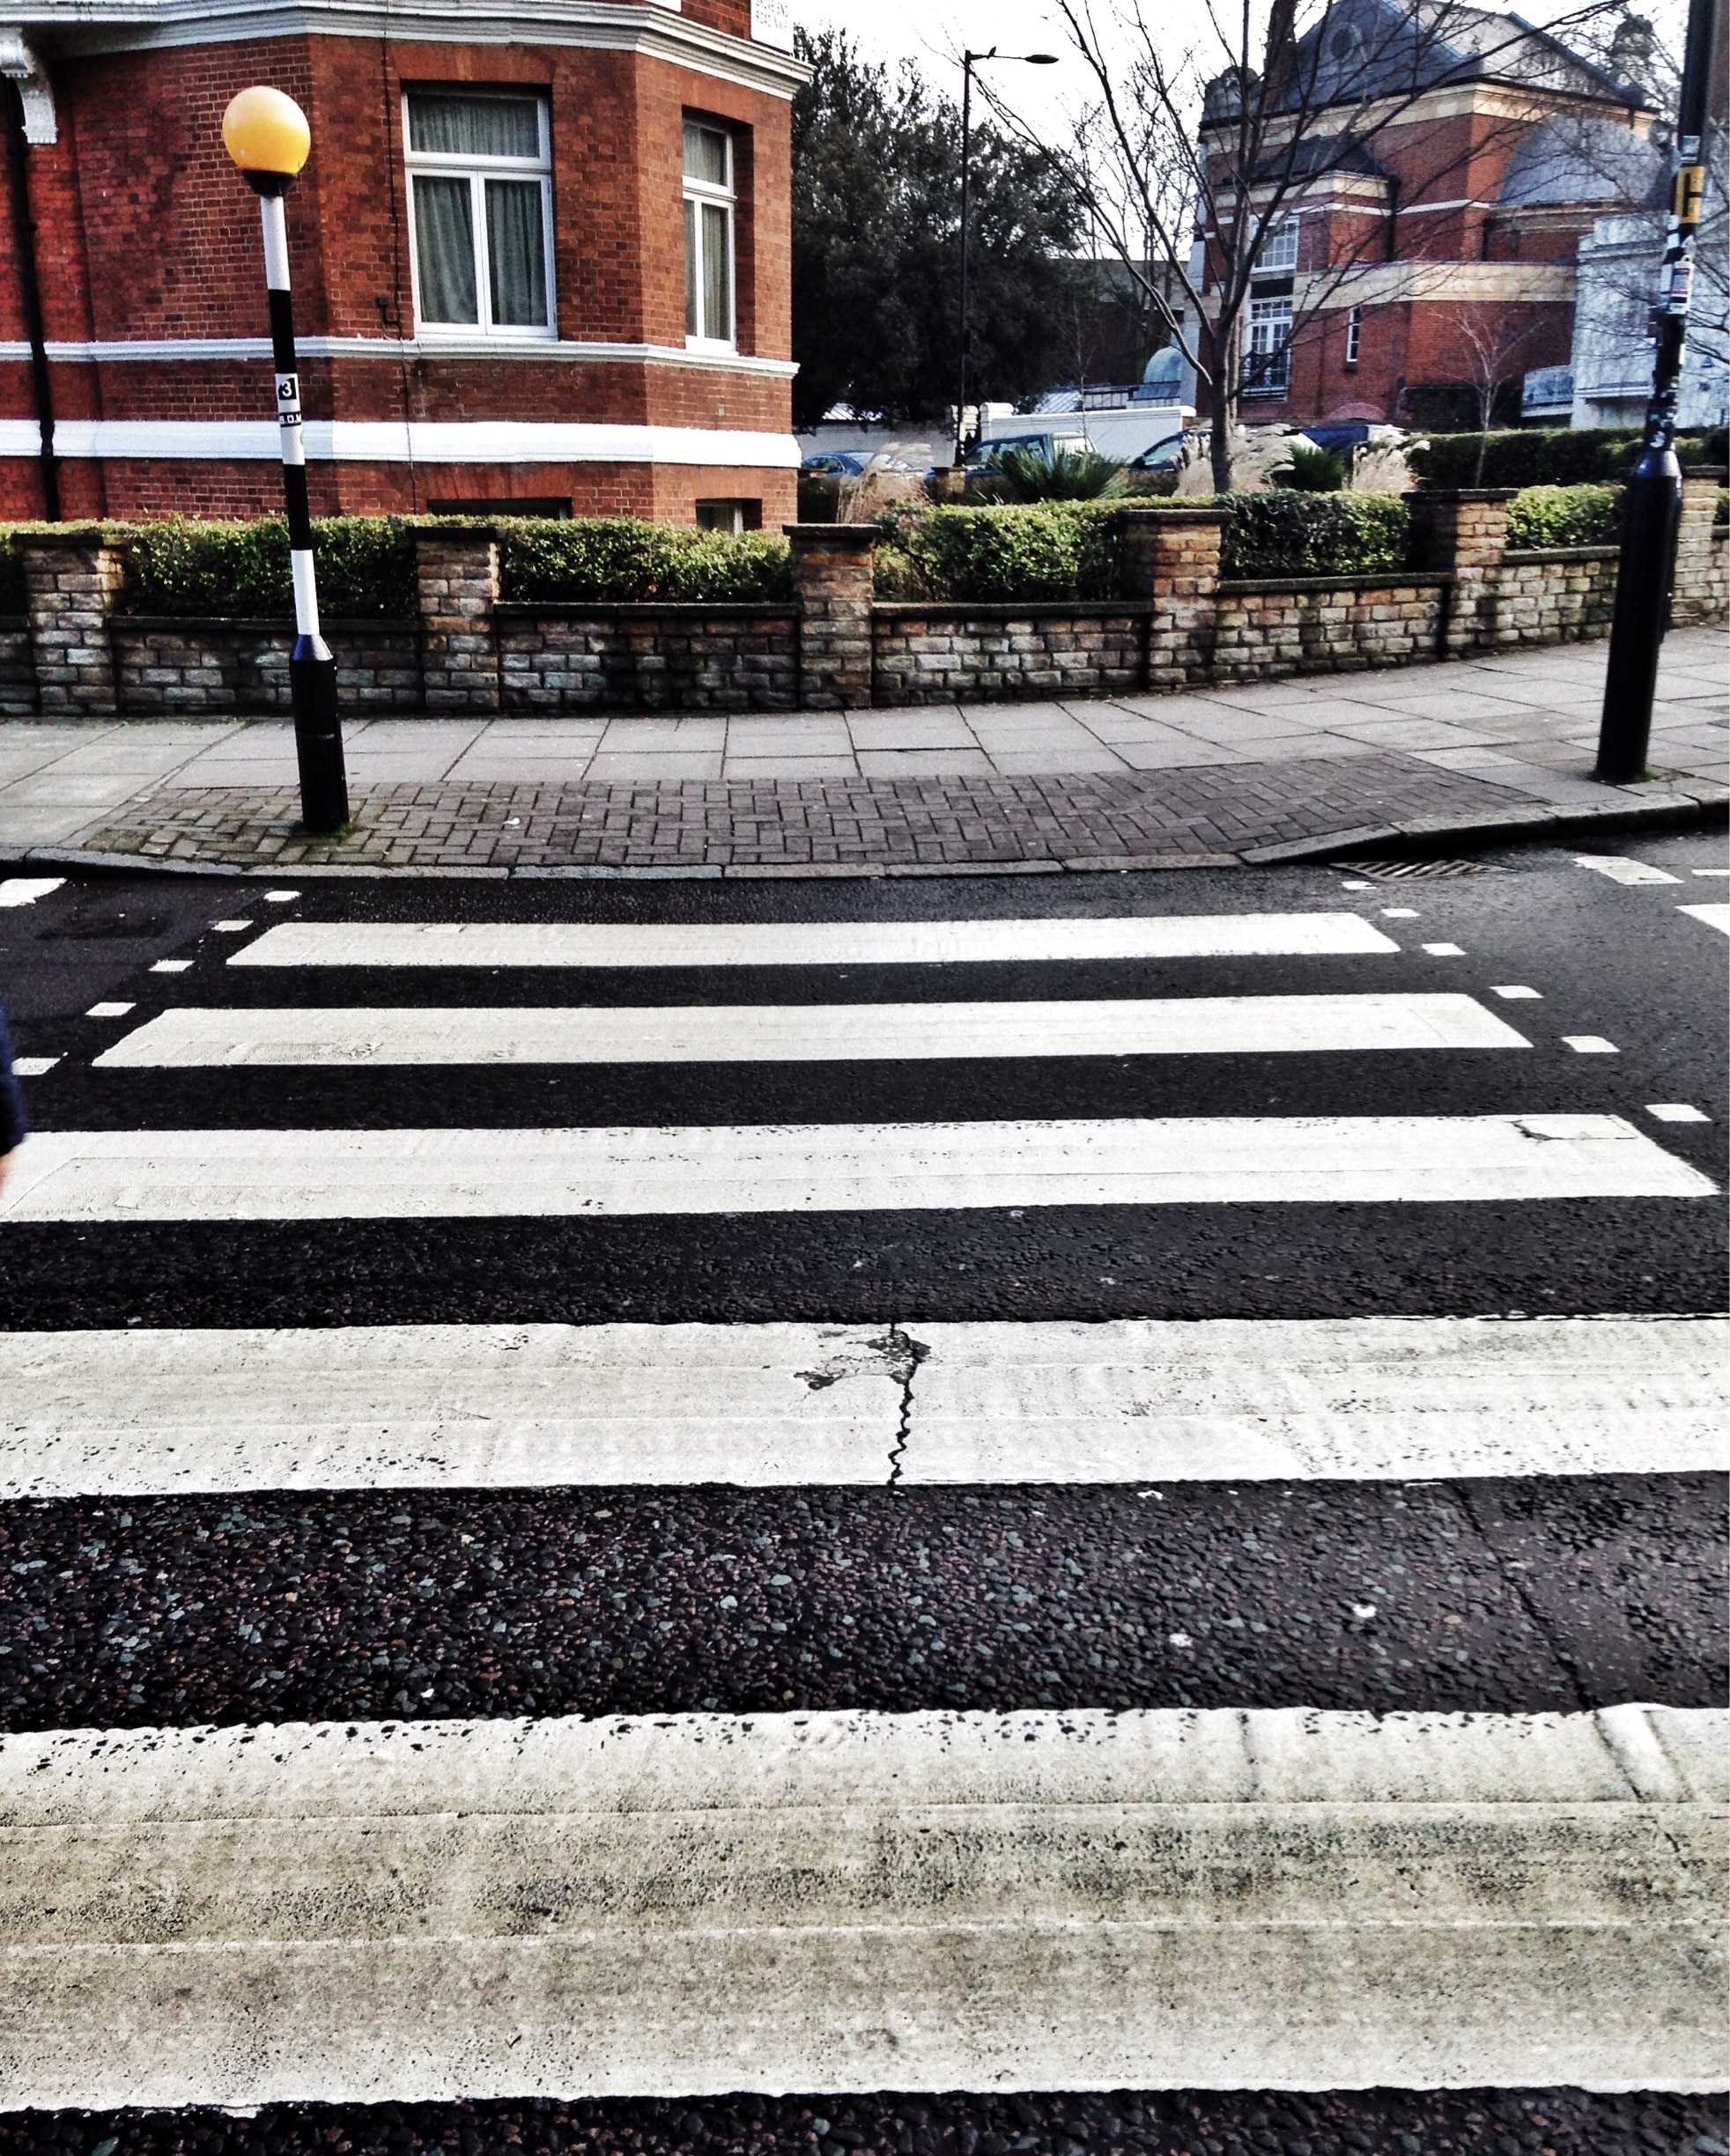 Stayed at a friend's flat during a layover which happens to be at 1 Abbey Rd. Got to see the famous crosswalk directly outside of the front door before the hoards of tourists came to block the intersection! 
